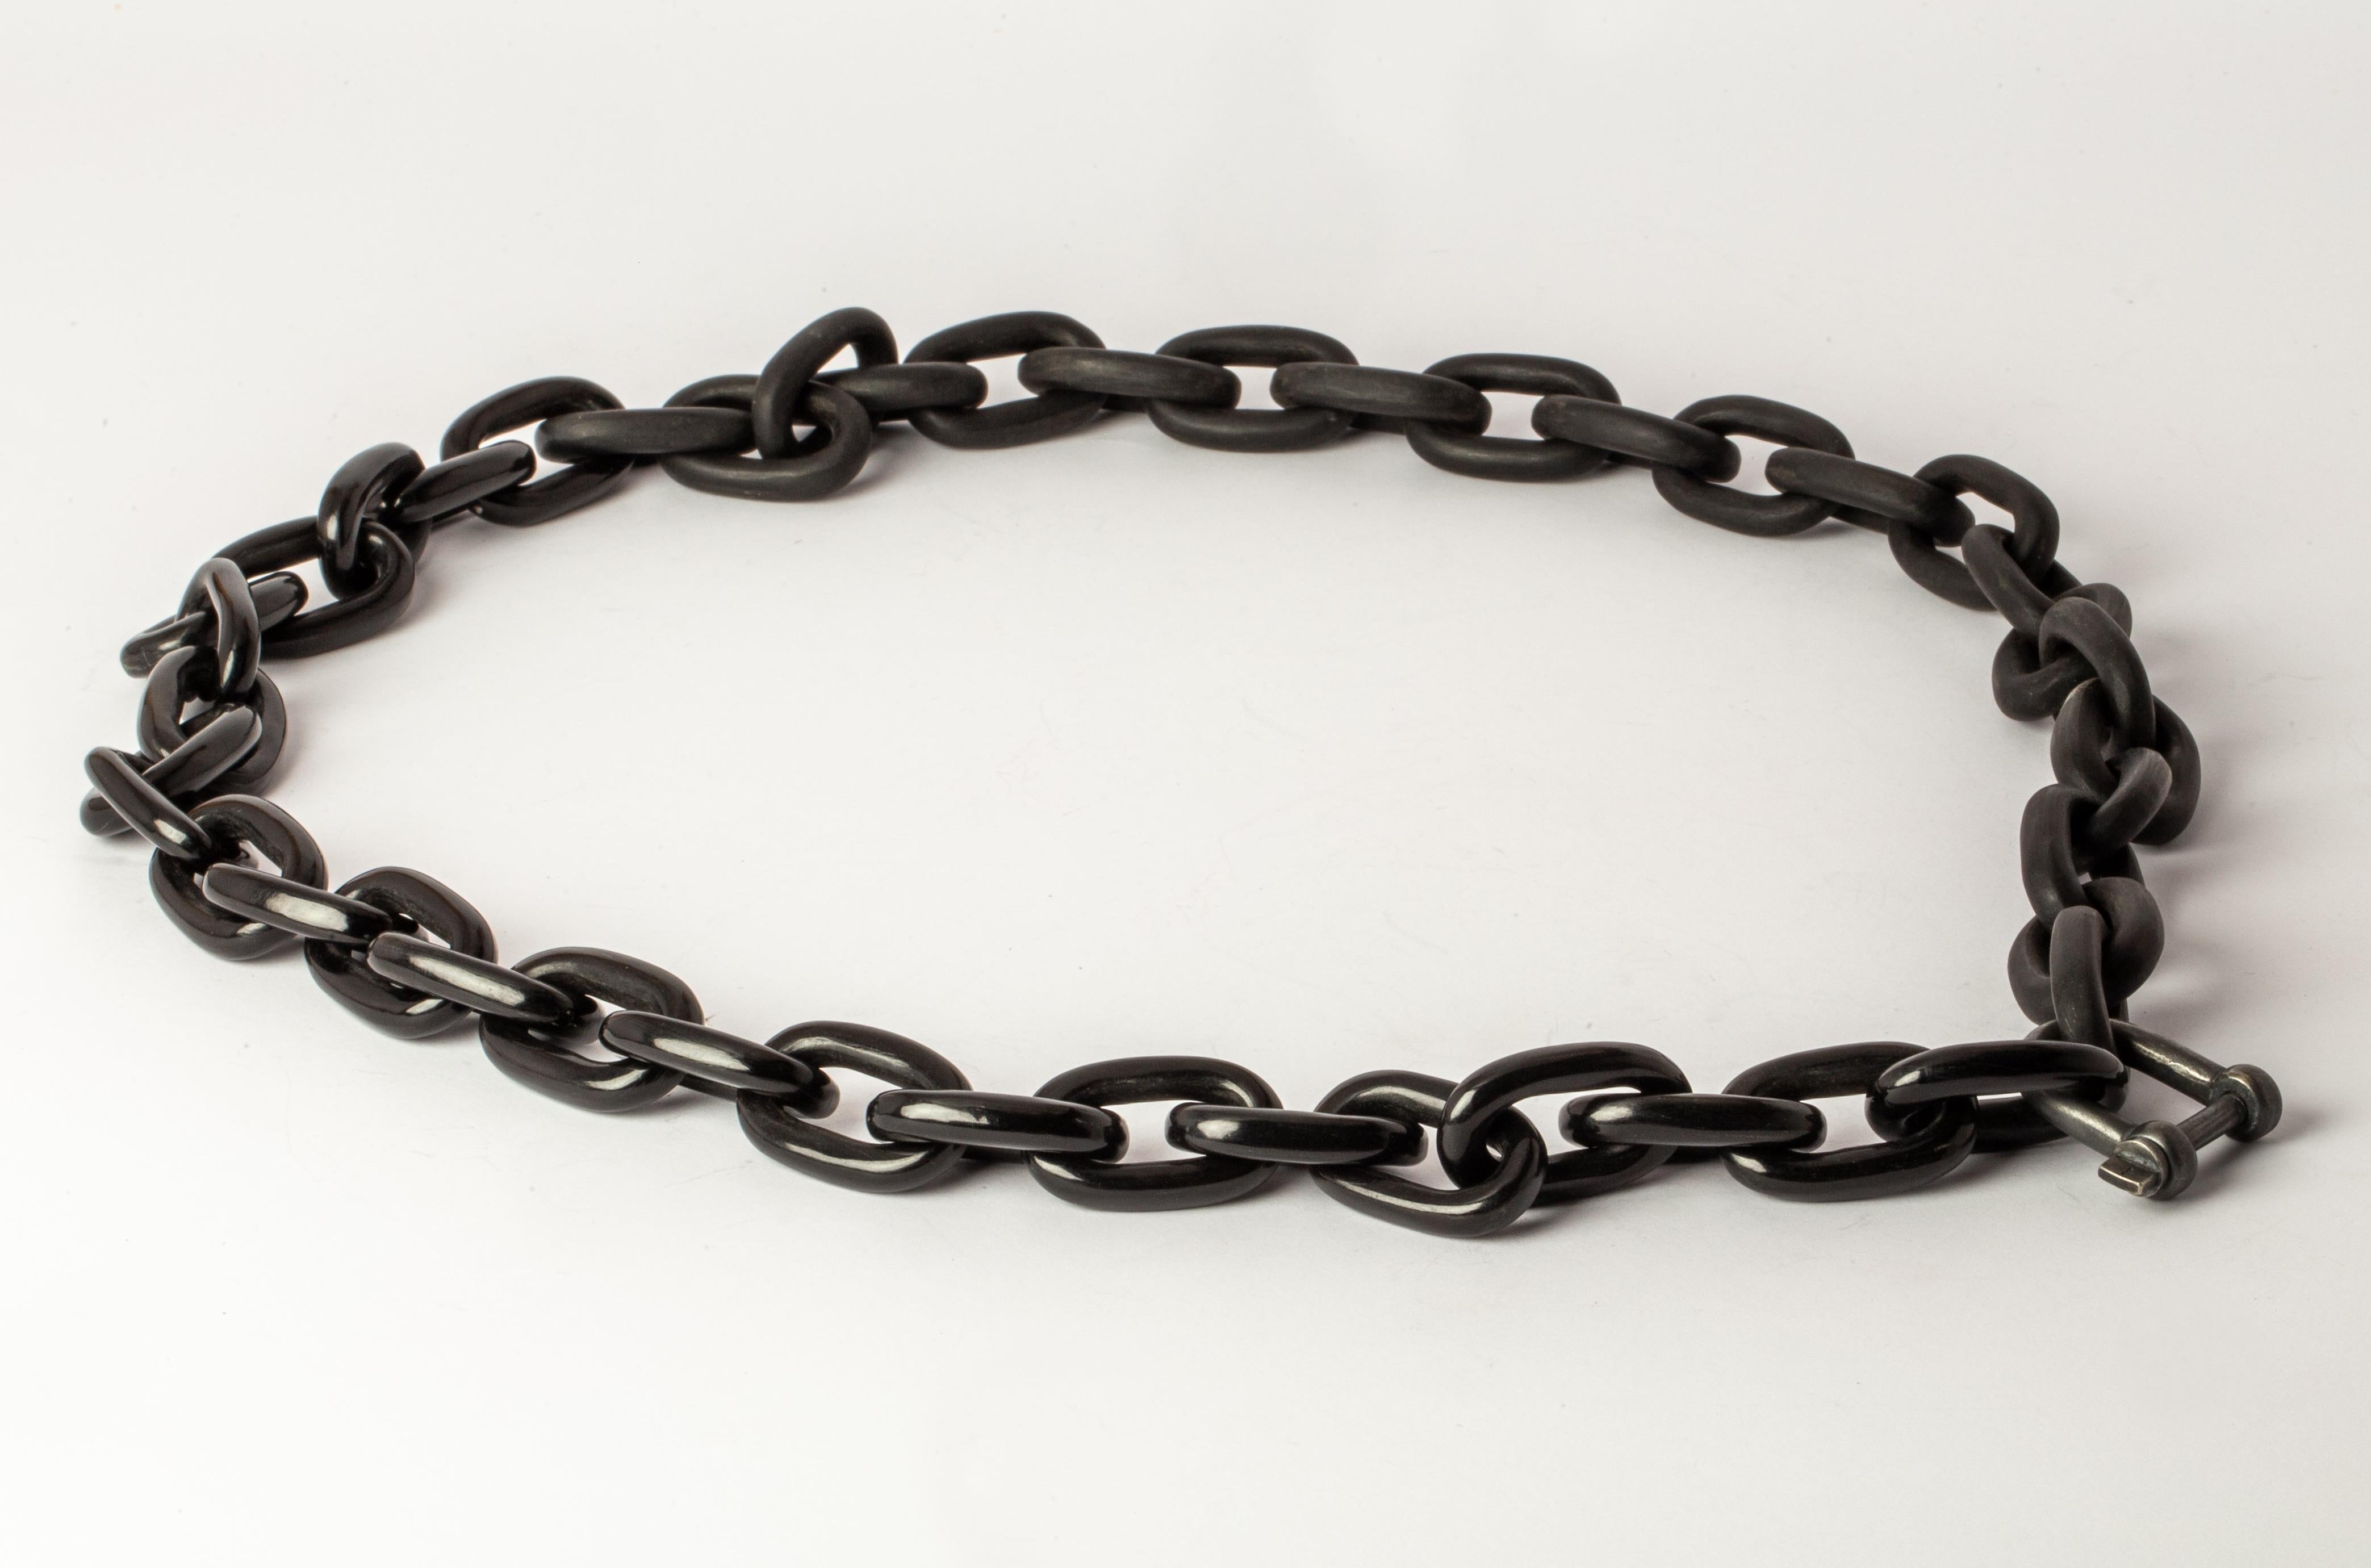 All organic chain is carved by hand. Chains made from horn are modeled and constructed into chain links
The Charm System is an interrelated group of products that can be mixed and matched or worn individually.
Chain link size (L × H): 33 mm × 22